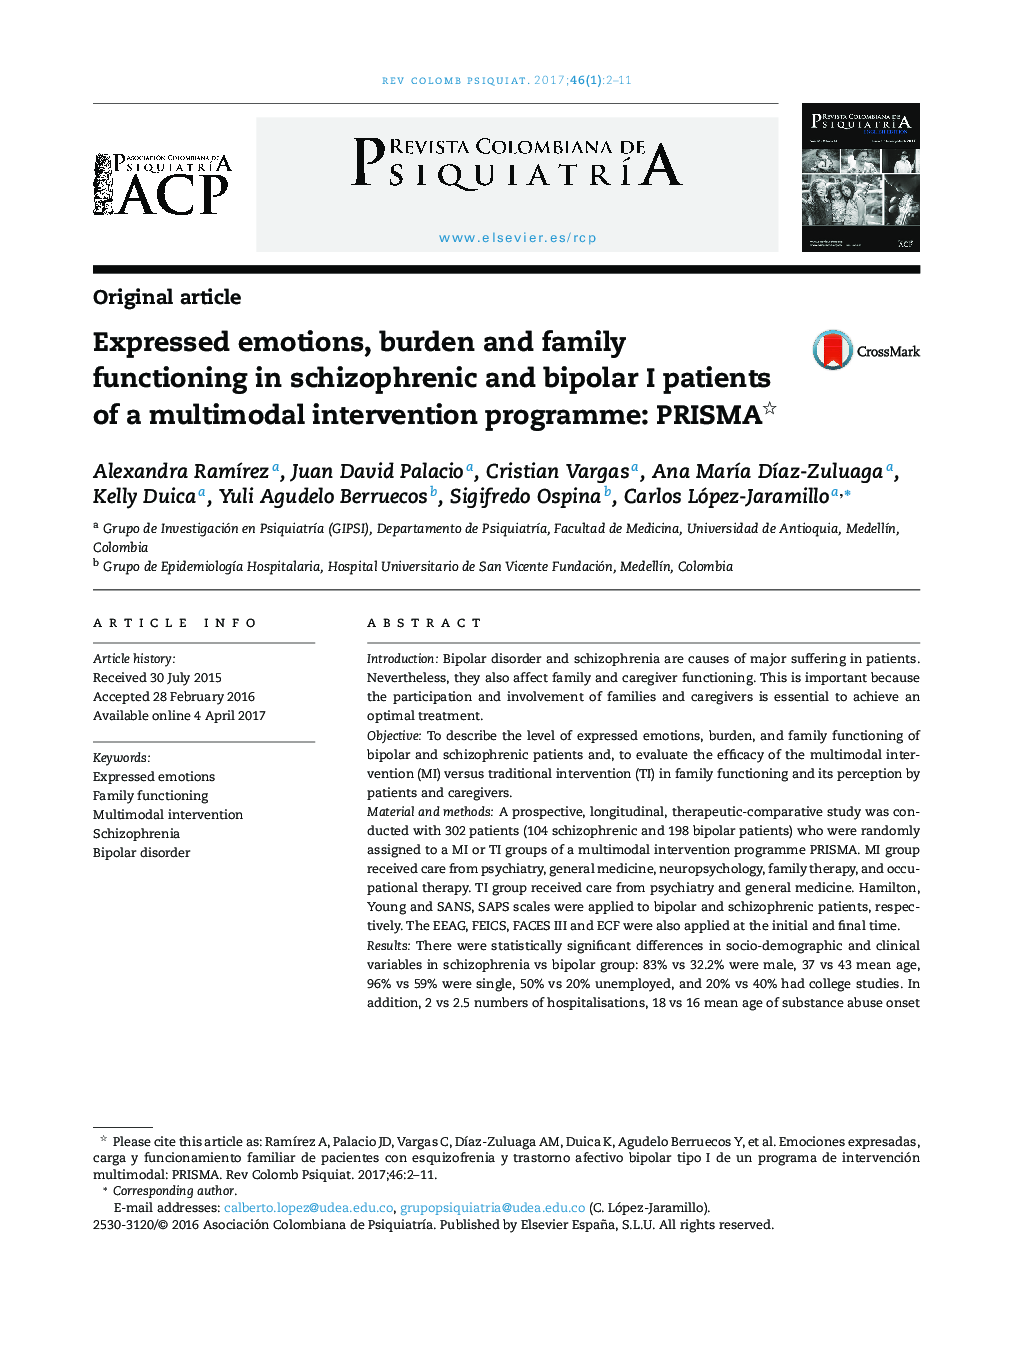 Expressed emotions, burden and family functioning in schizophrenic and bipolar I patients of a multimodal intervention programme: PRISMA